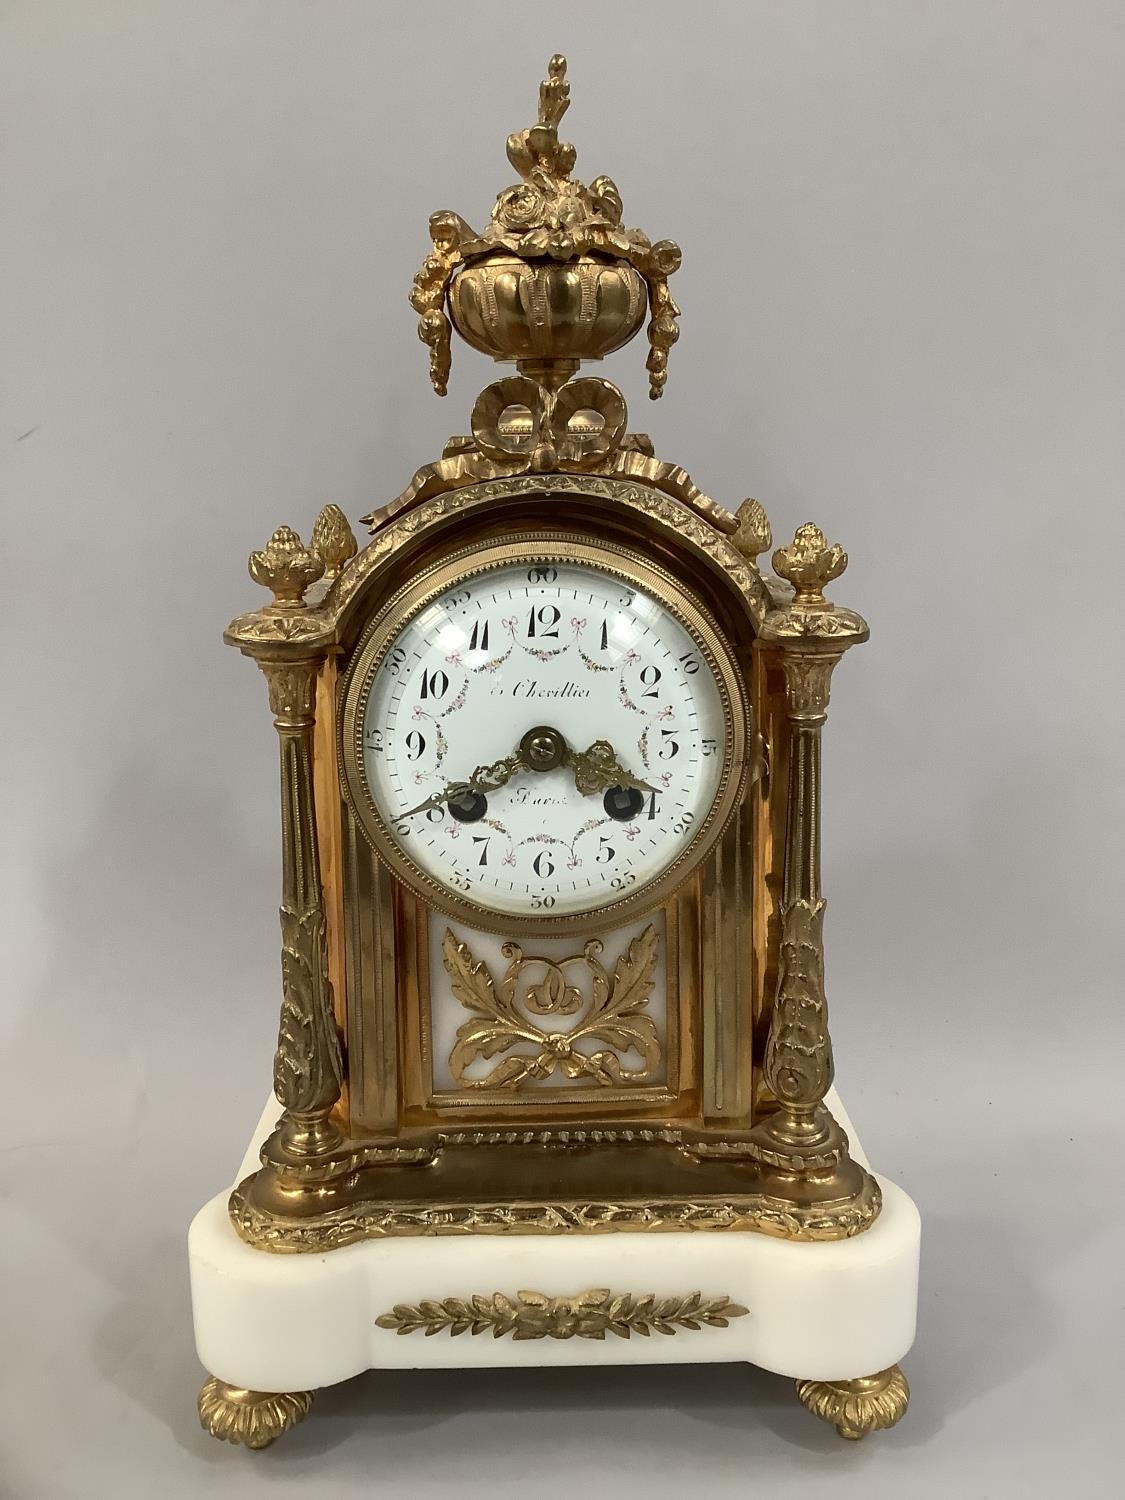 A 19TH CENTURY FRENCH ORMOLU AND ALABASTER CLOCK, with 8 day pendulum movement striking on one bell,